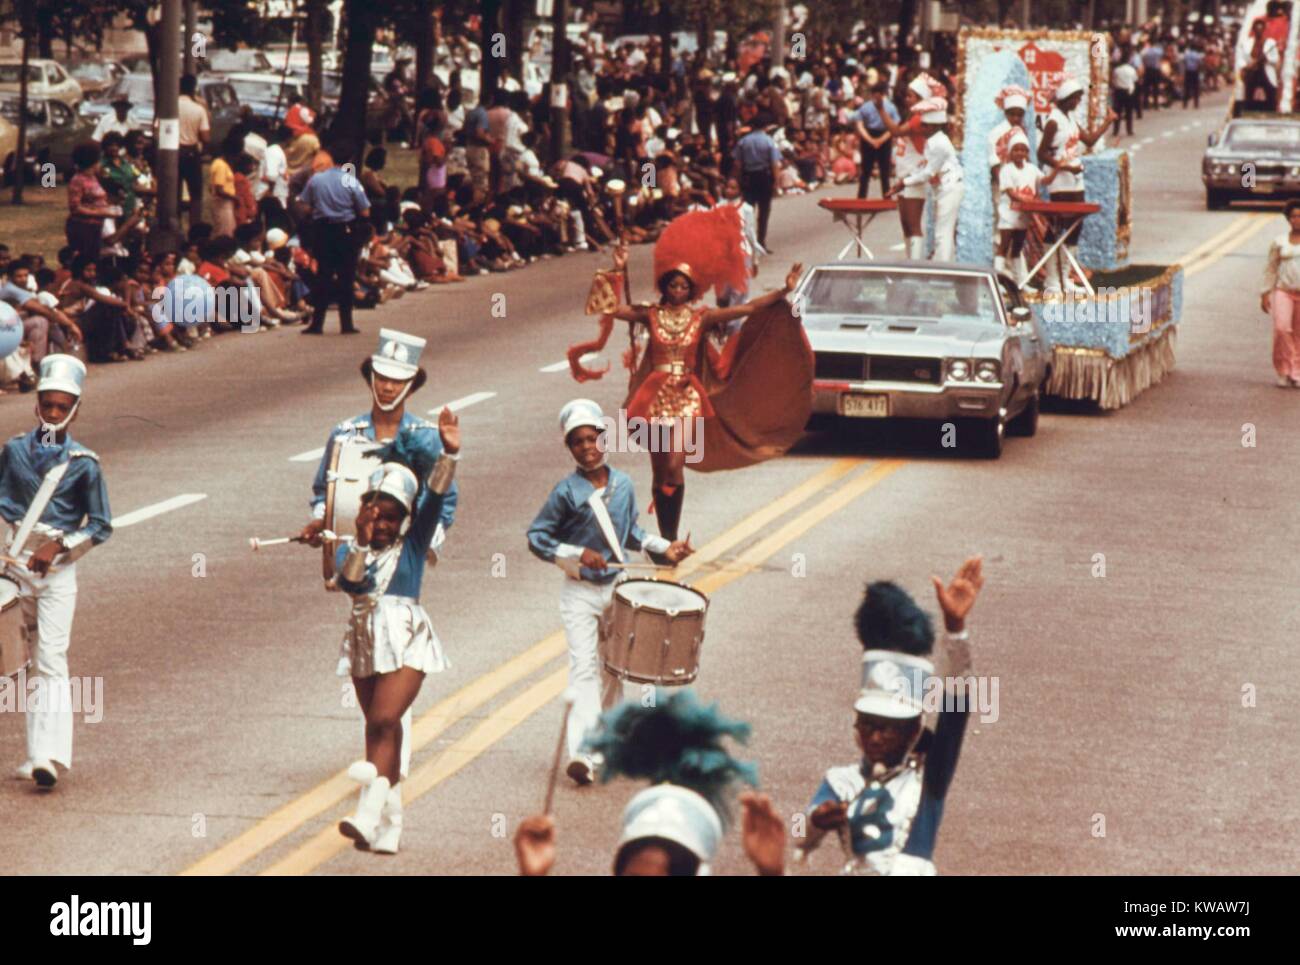 Marching band of Bud Billiken Day Parade, an annual event celebrating black history and pride, South Side Chicago, Illinois, August, 1973. Image courtesy National Archives. Stock Photo